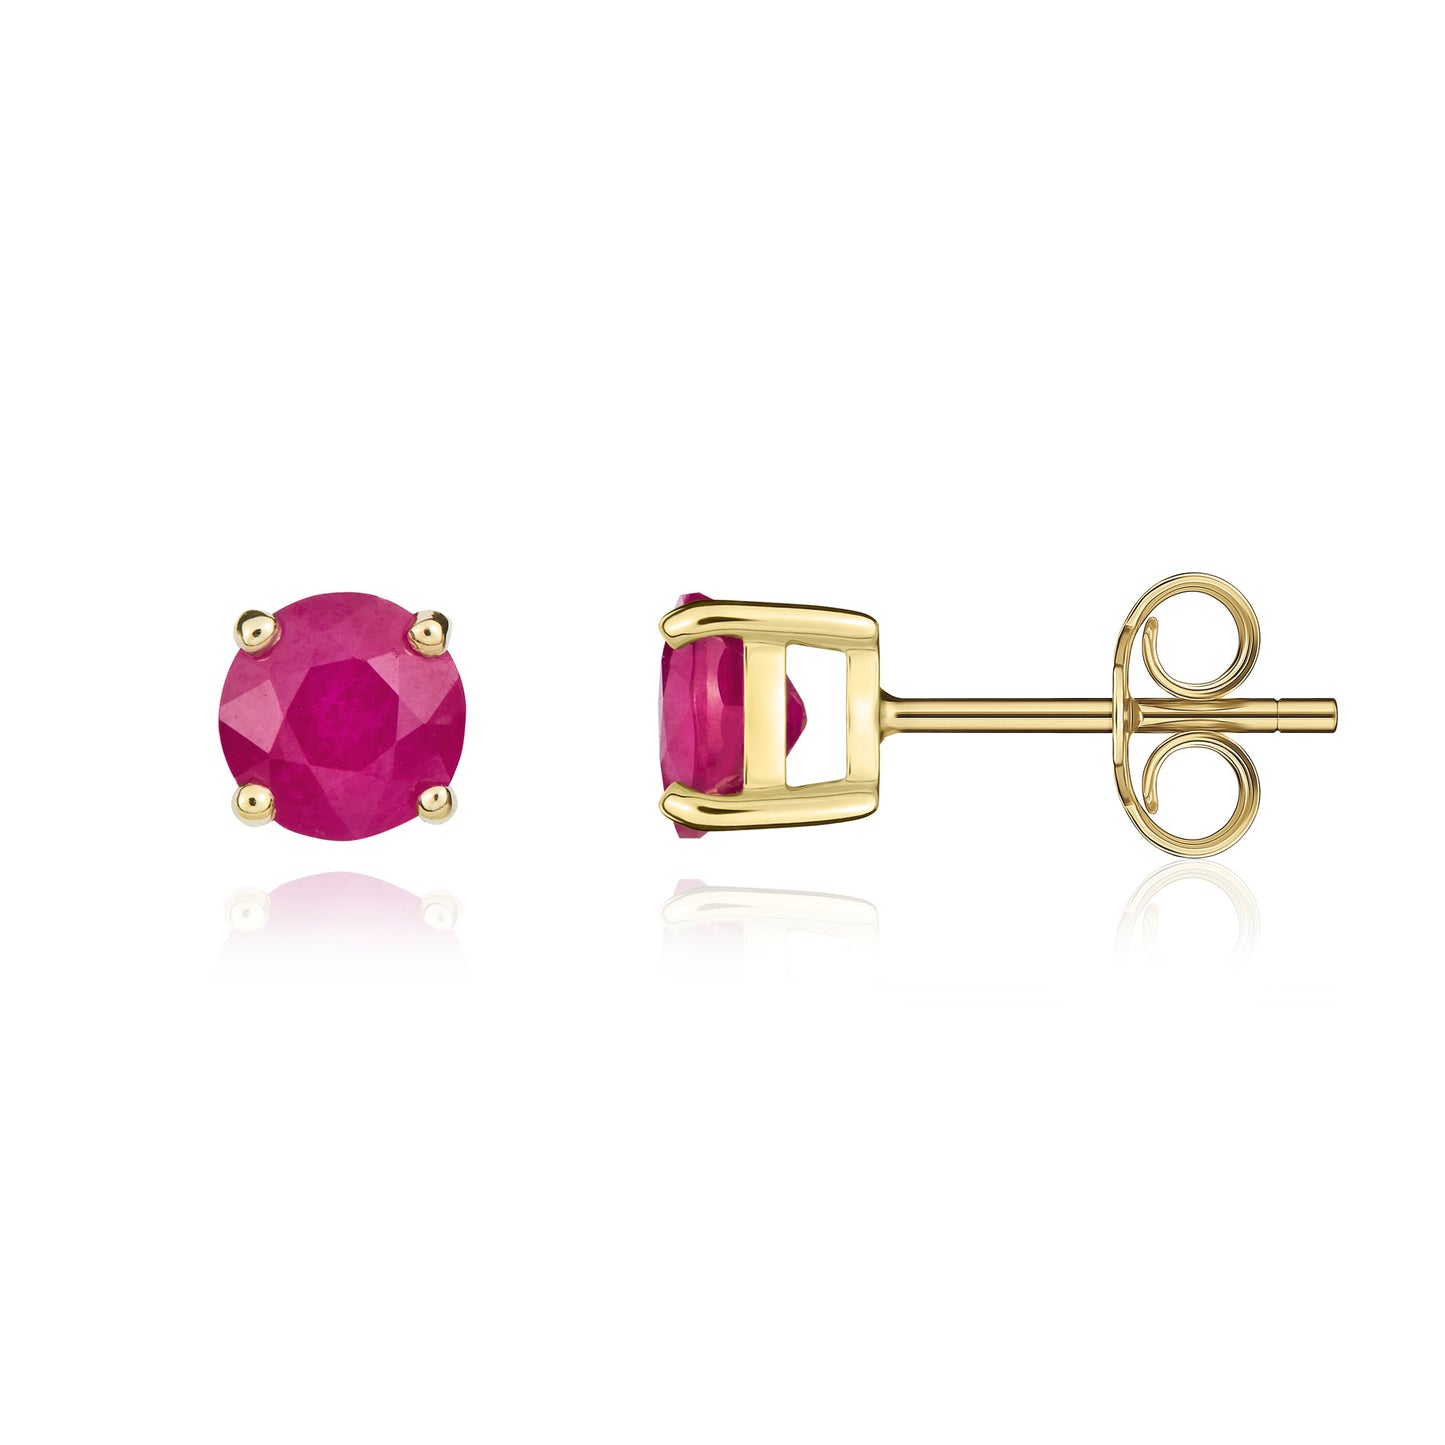 9K Yellow Gold 5mm Round Ruby Stud Earrings